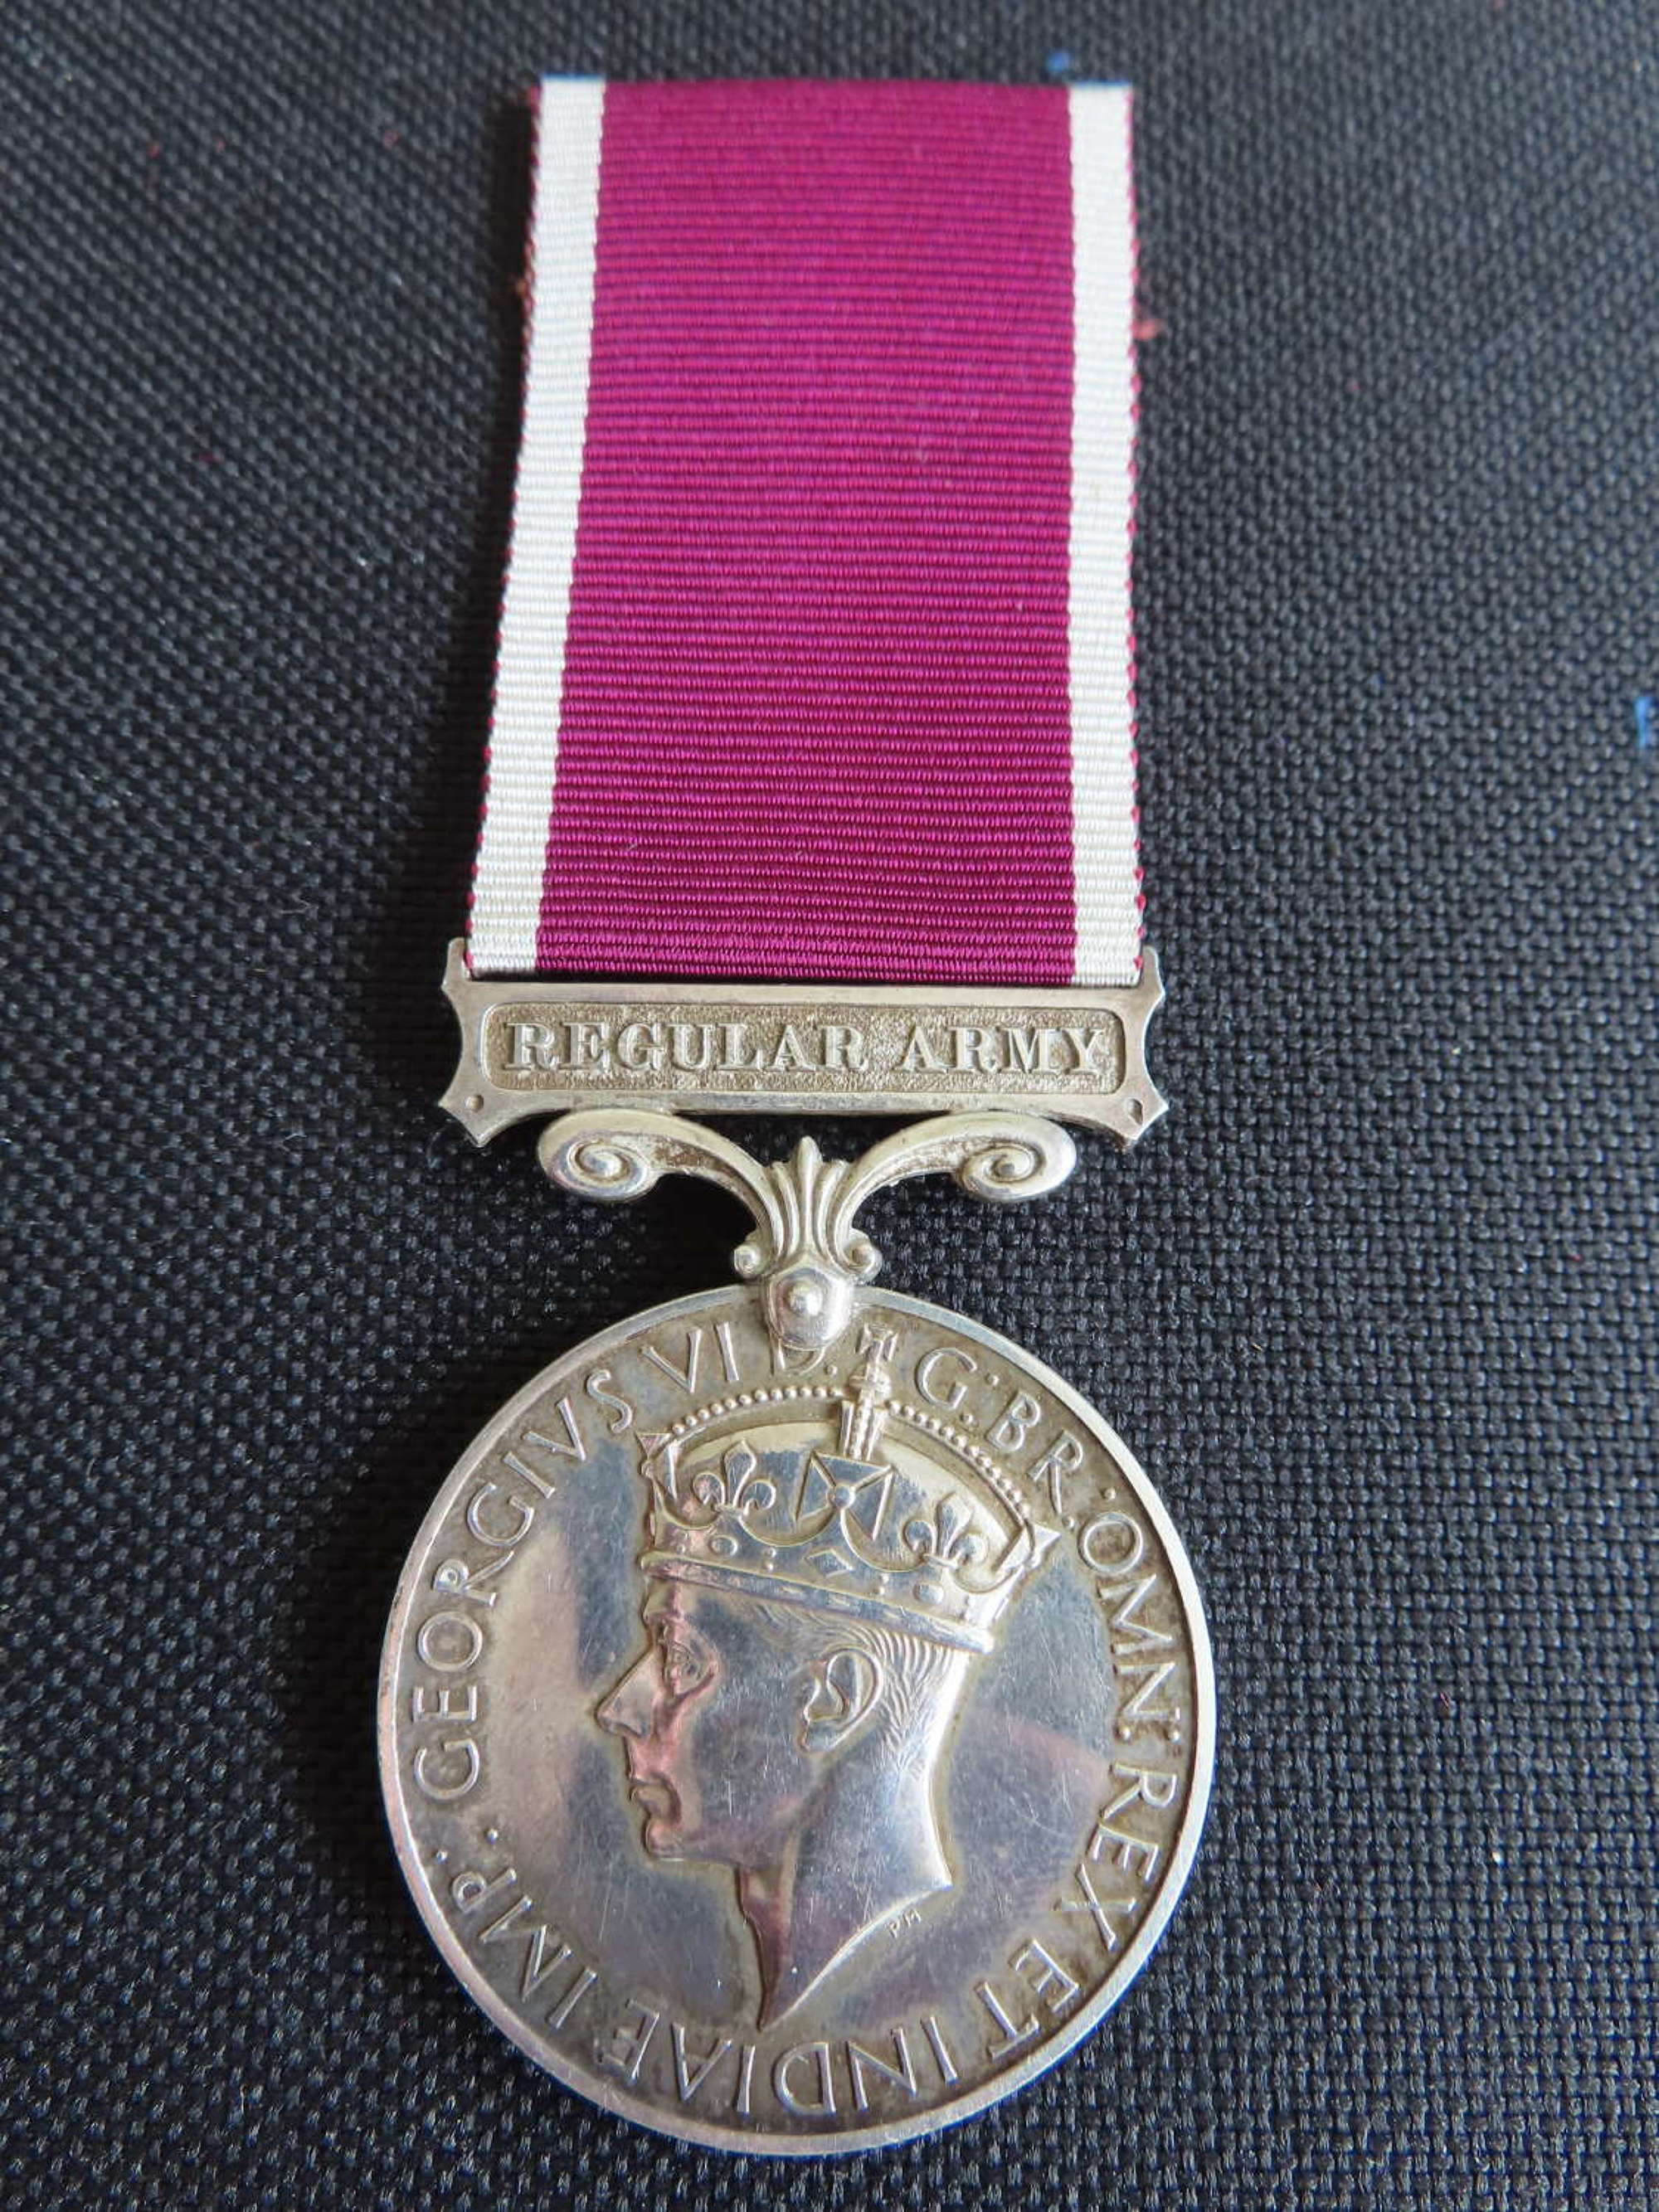 Long service good conduct medal awarded to Cpl Acteson R.E.